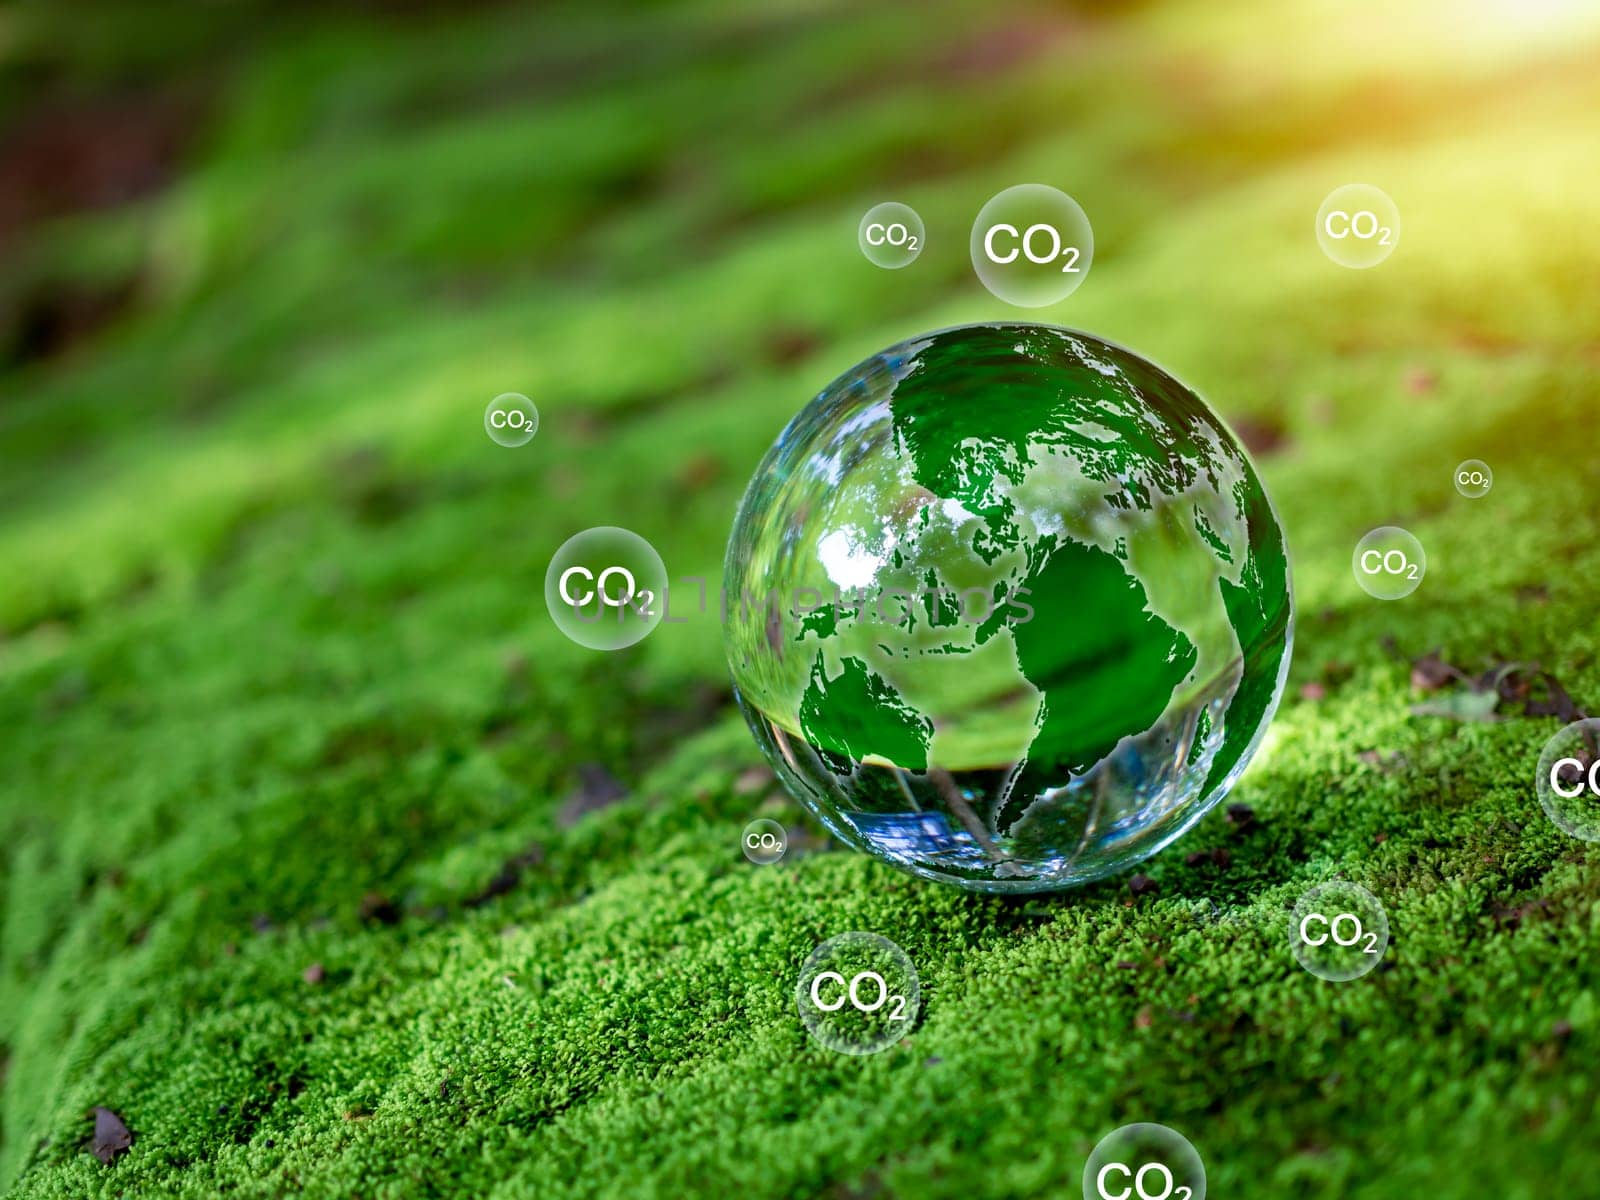 Crystal ball on moss in green forest. CO2 emission reduction concept, clean and friendly environment without carbon dioxide emissions. Planting trees to reduce CO2 emissions, environmental protection concept.